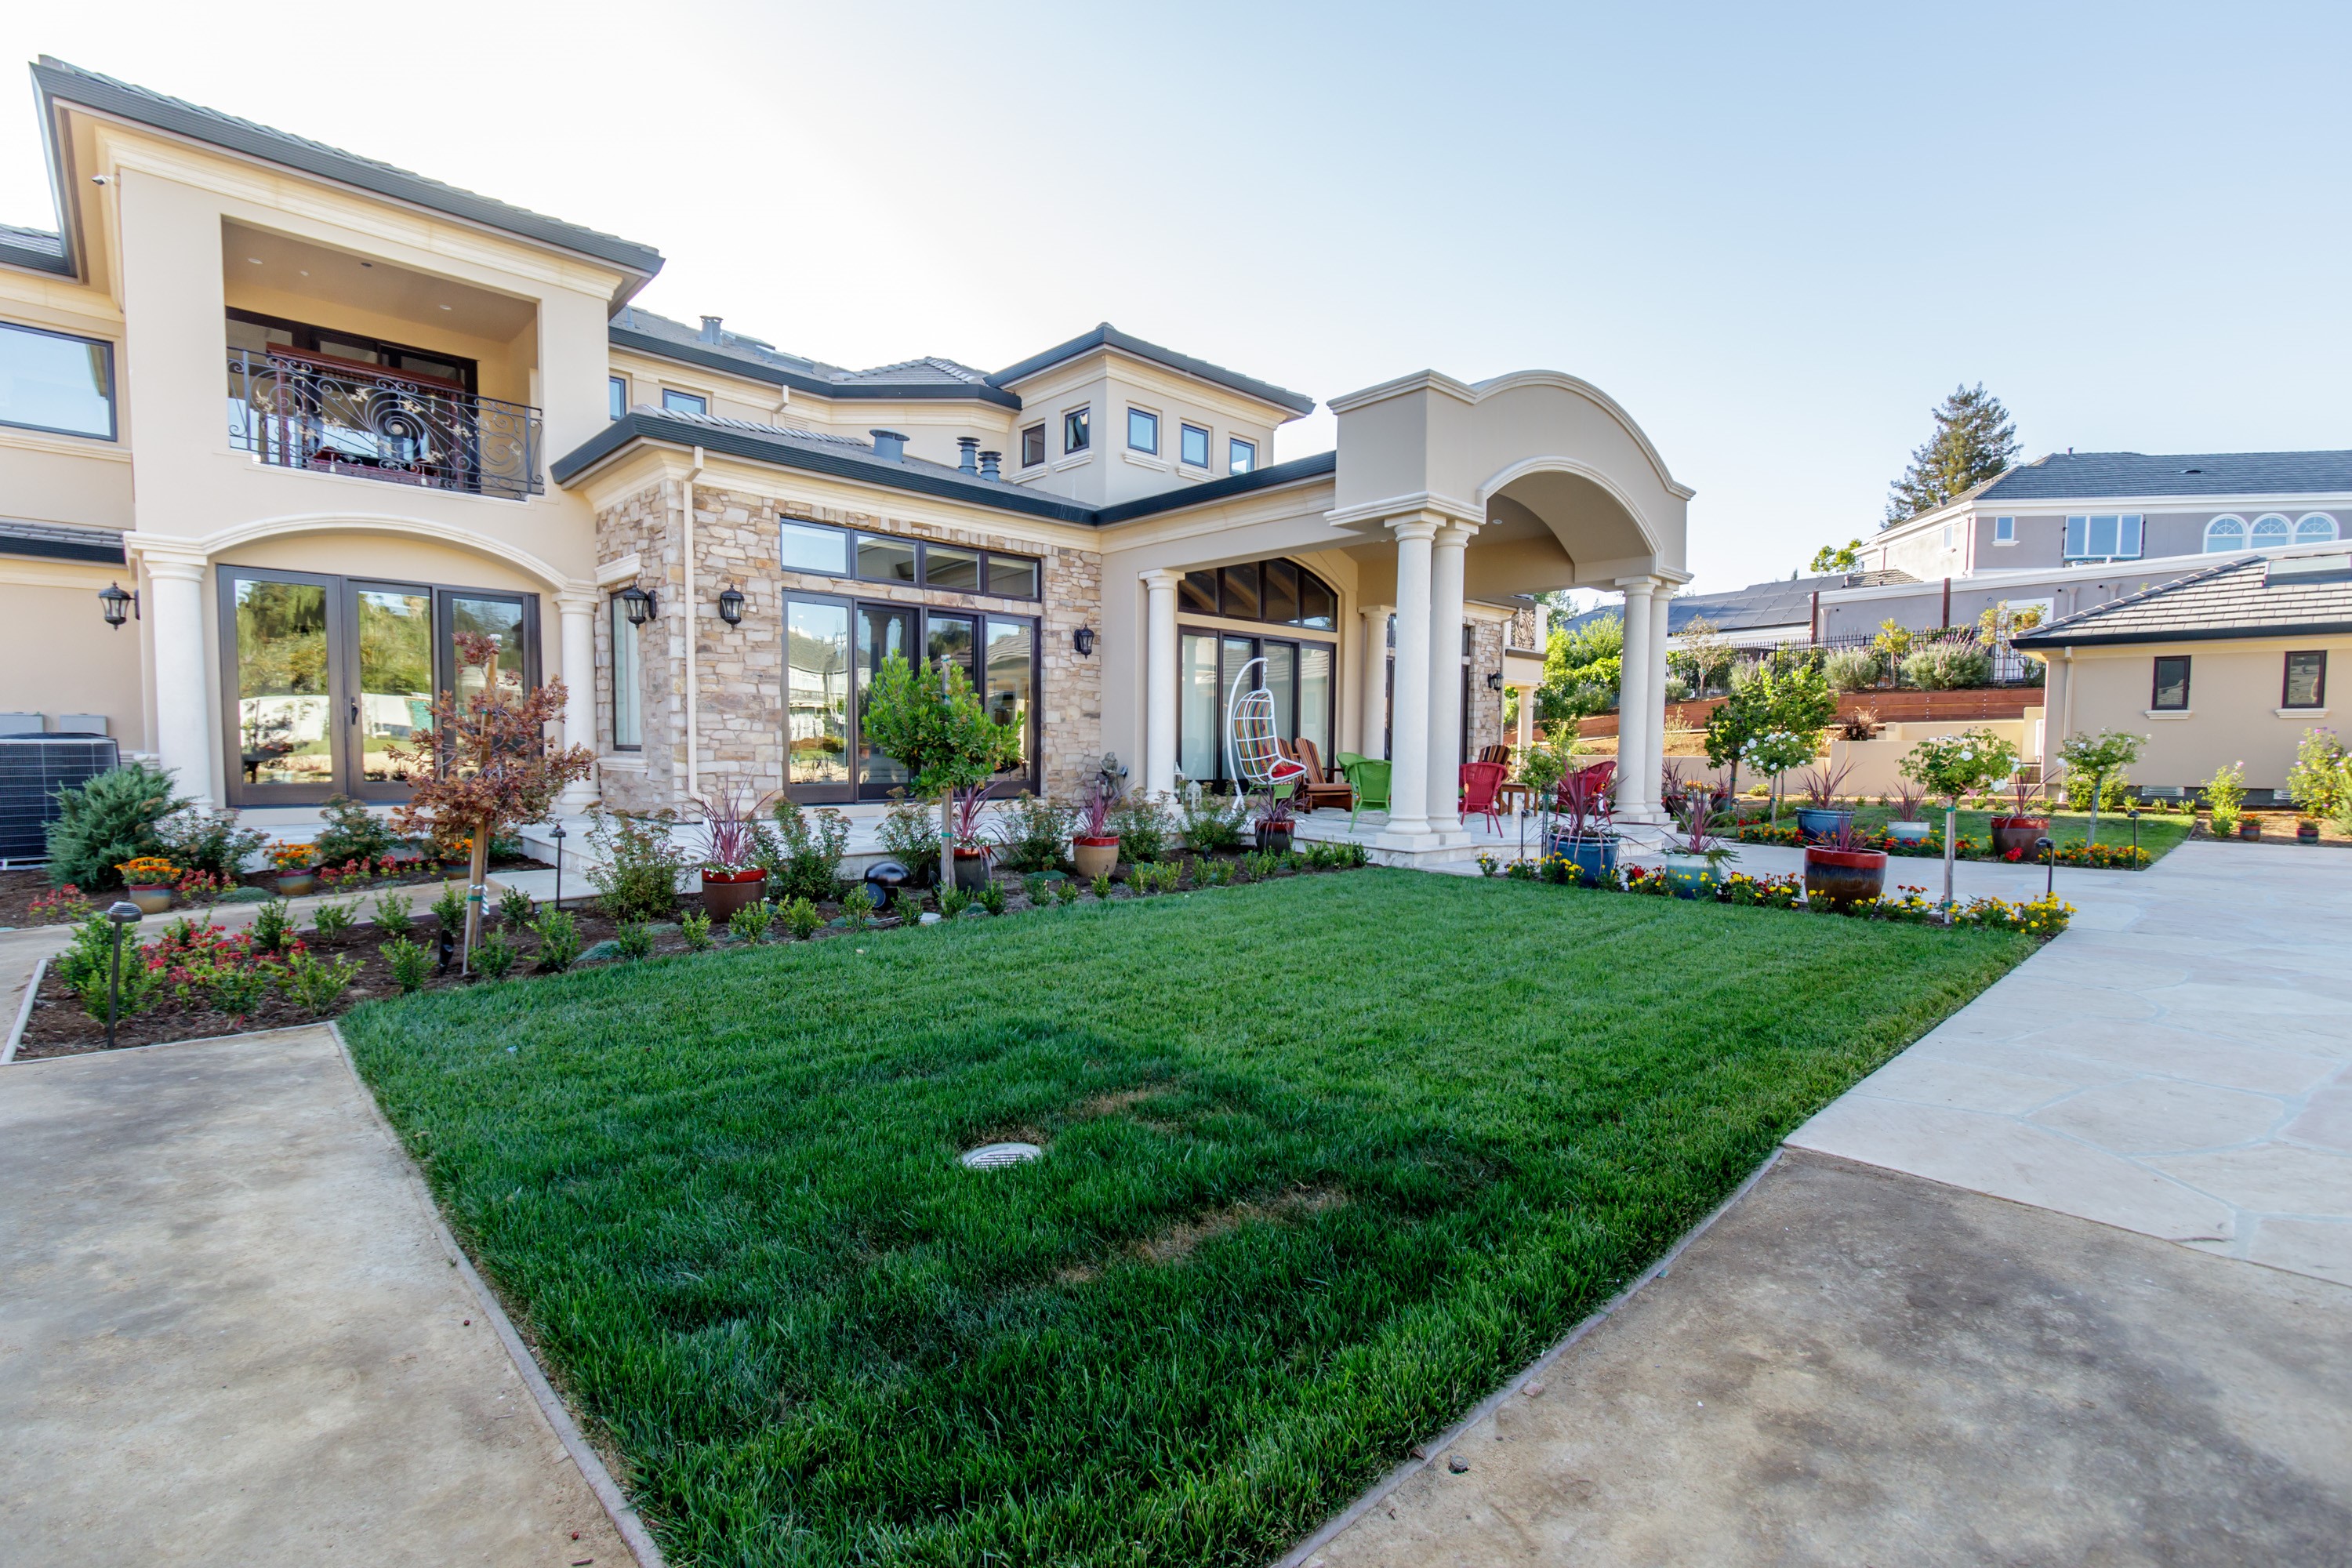 Custom luxury home built by local Cupertino builders